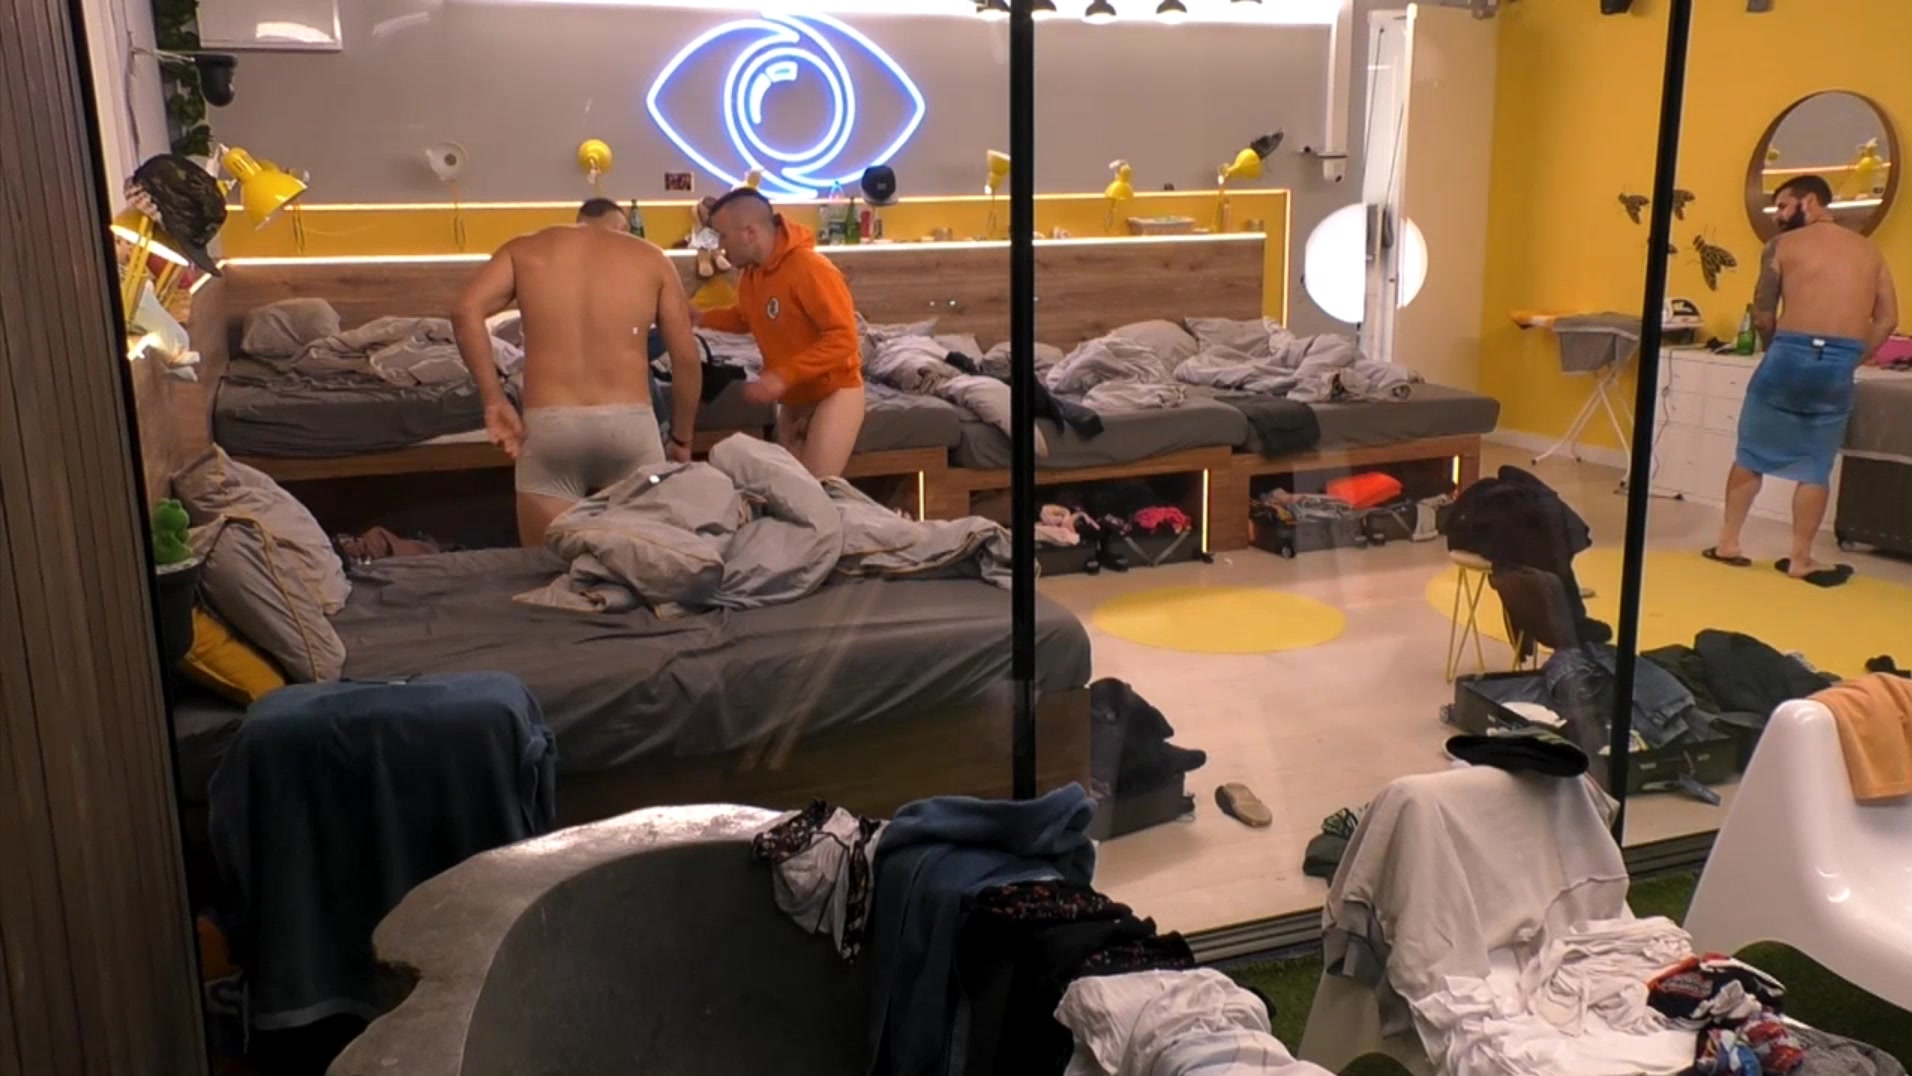 HOT GUYS CHANGING FROM BIG BROTHER POLAND2